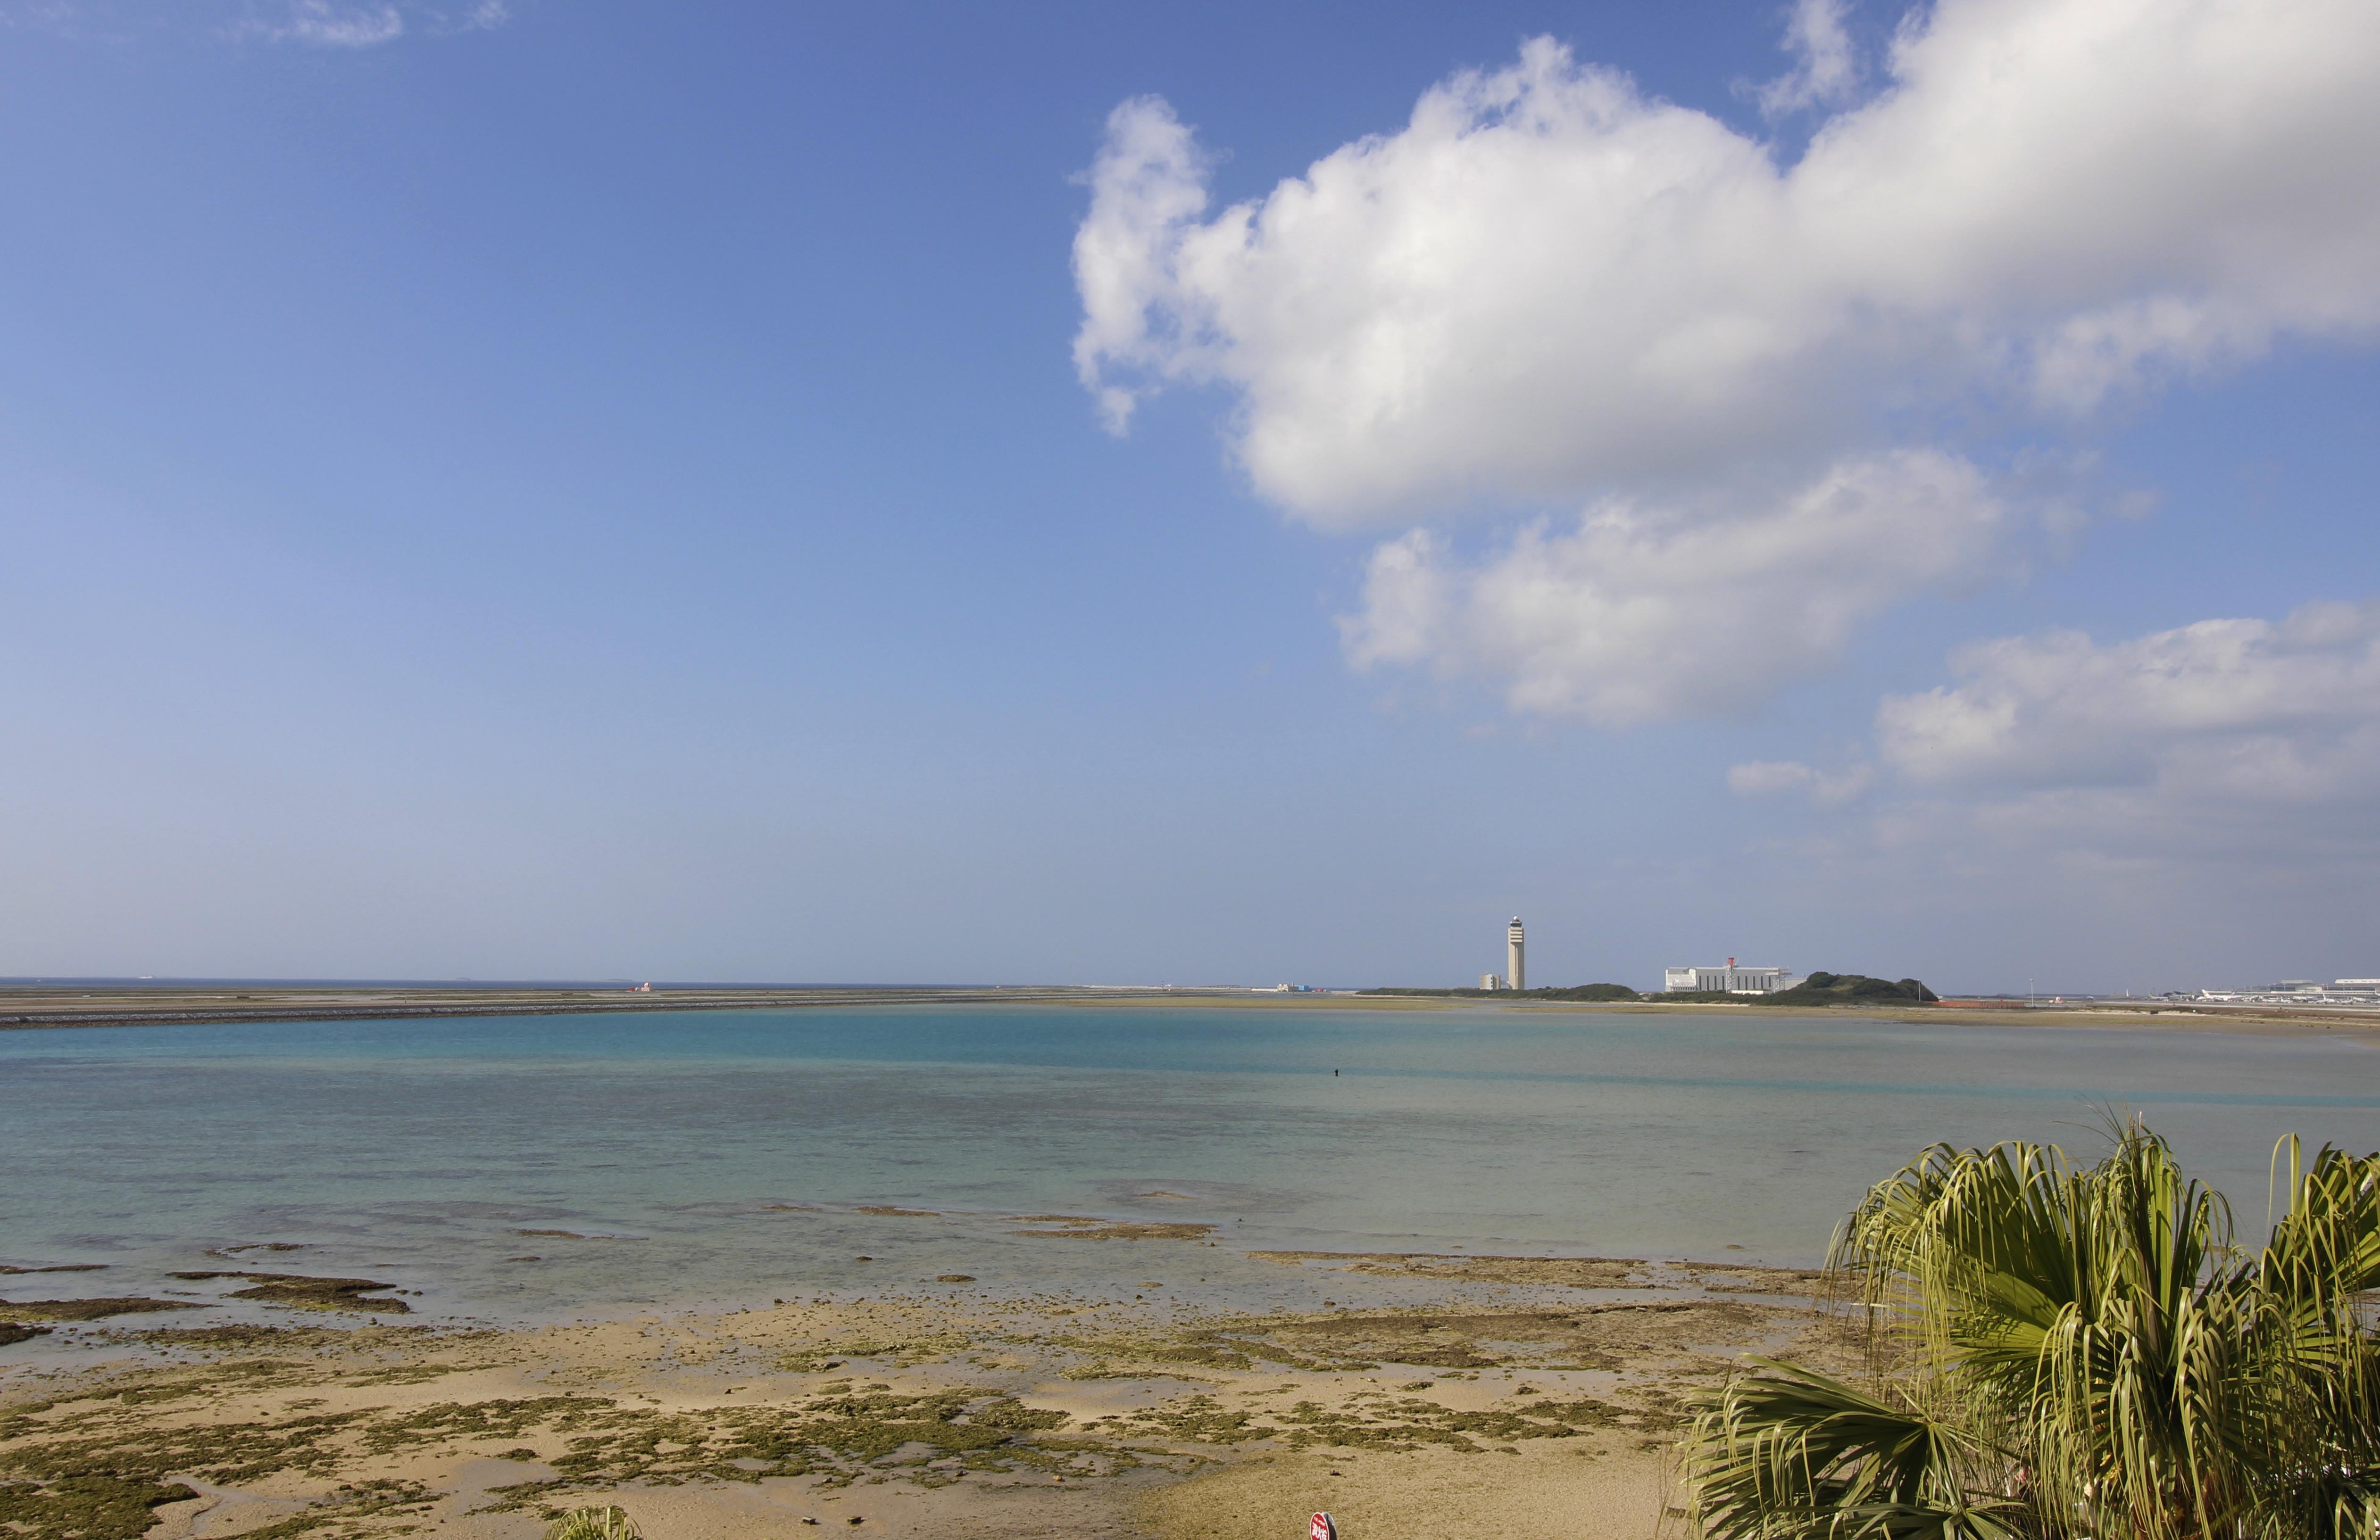 The attractions of Okinawa, a sightseeing destination you can enjoy together with karate